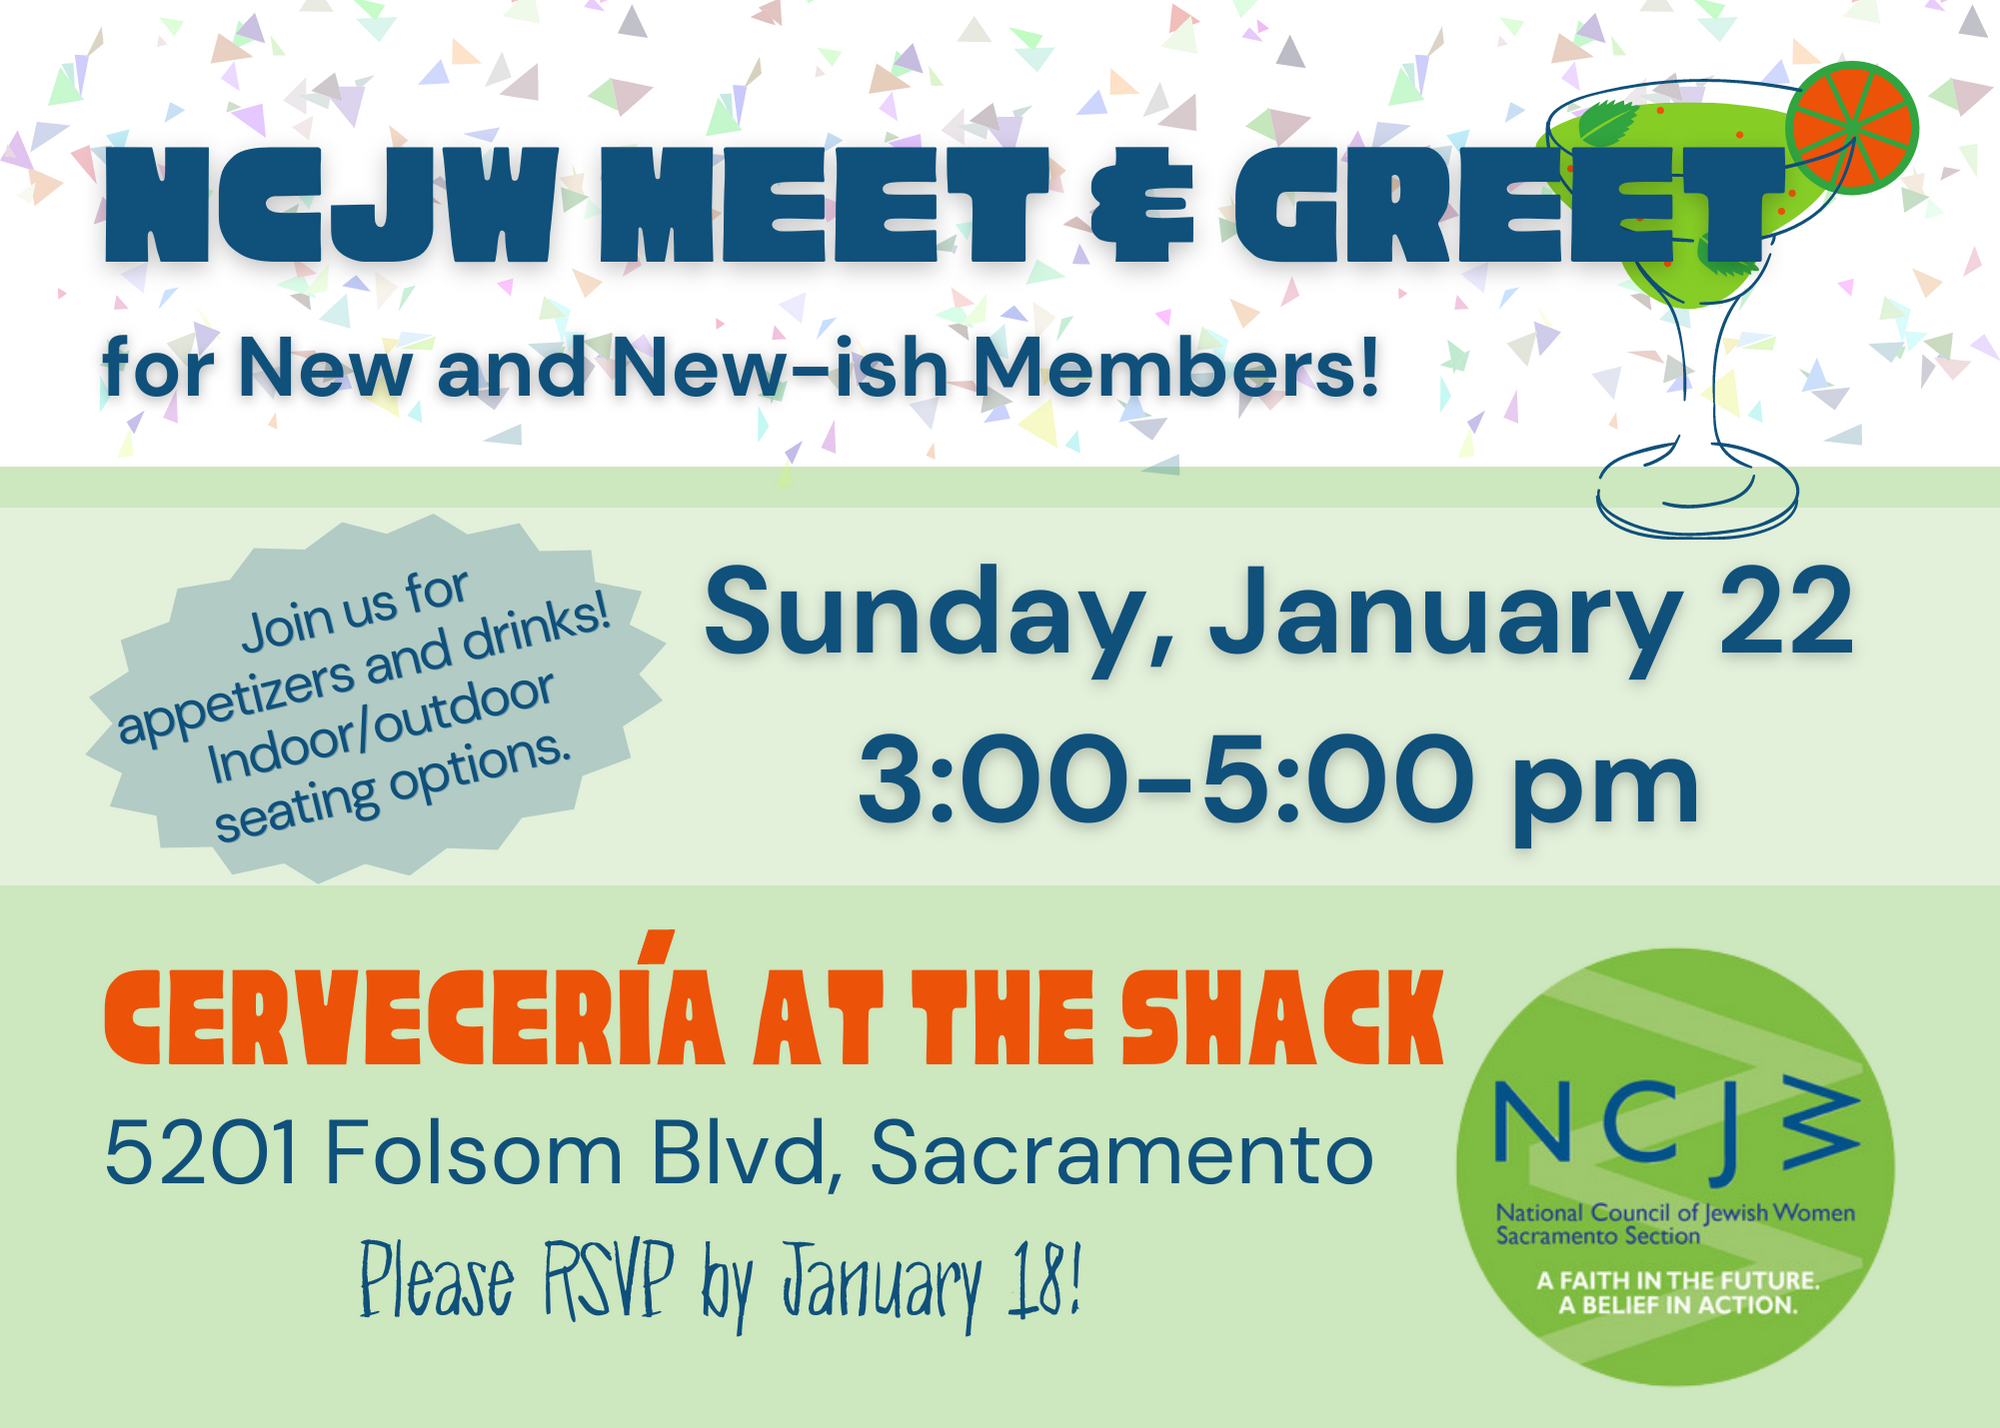 Meet and Greet event title, Sunday, January 22, 2023, 3:00 - 5:00 p.m.